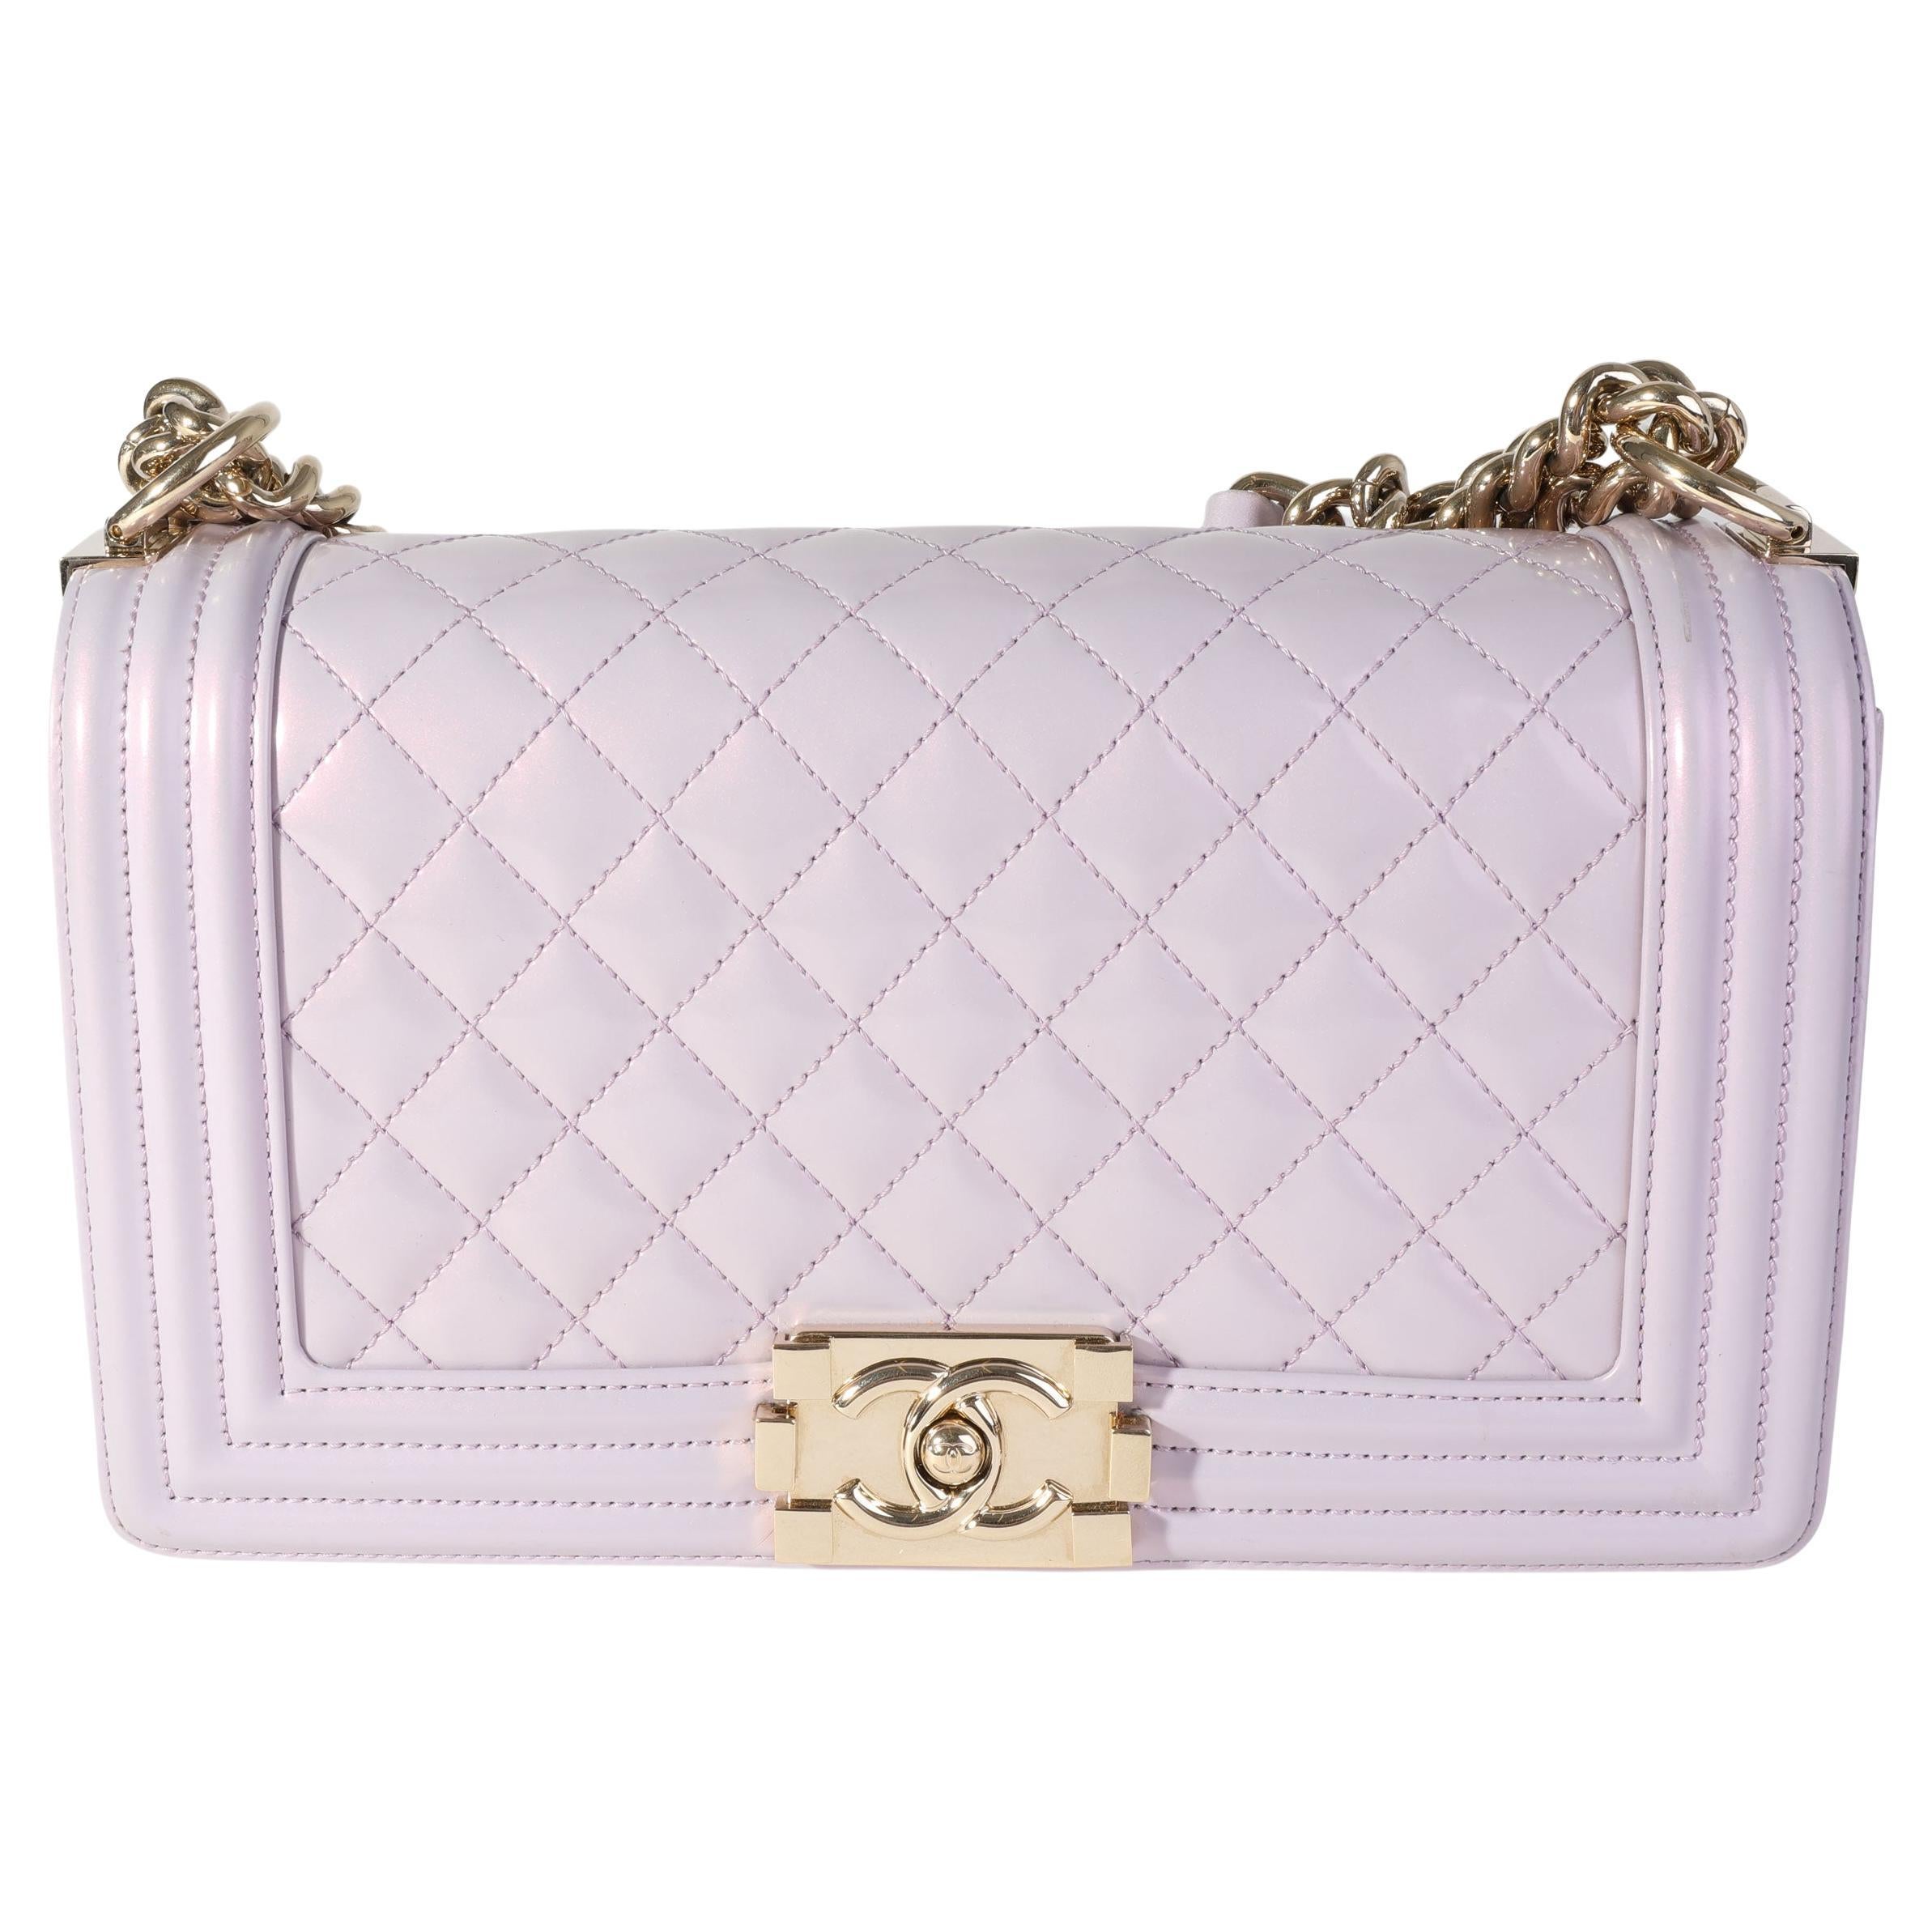 Chanel Purple Quilted Patent Leather Old Medium Boy Bag For Sale